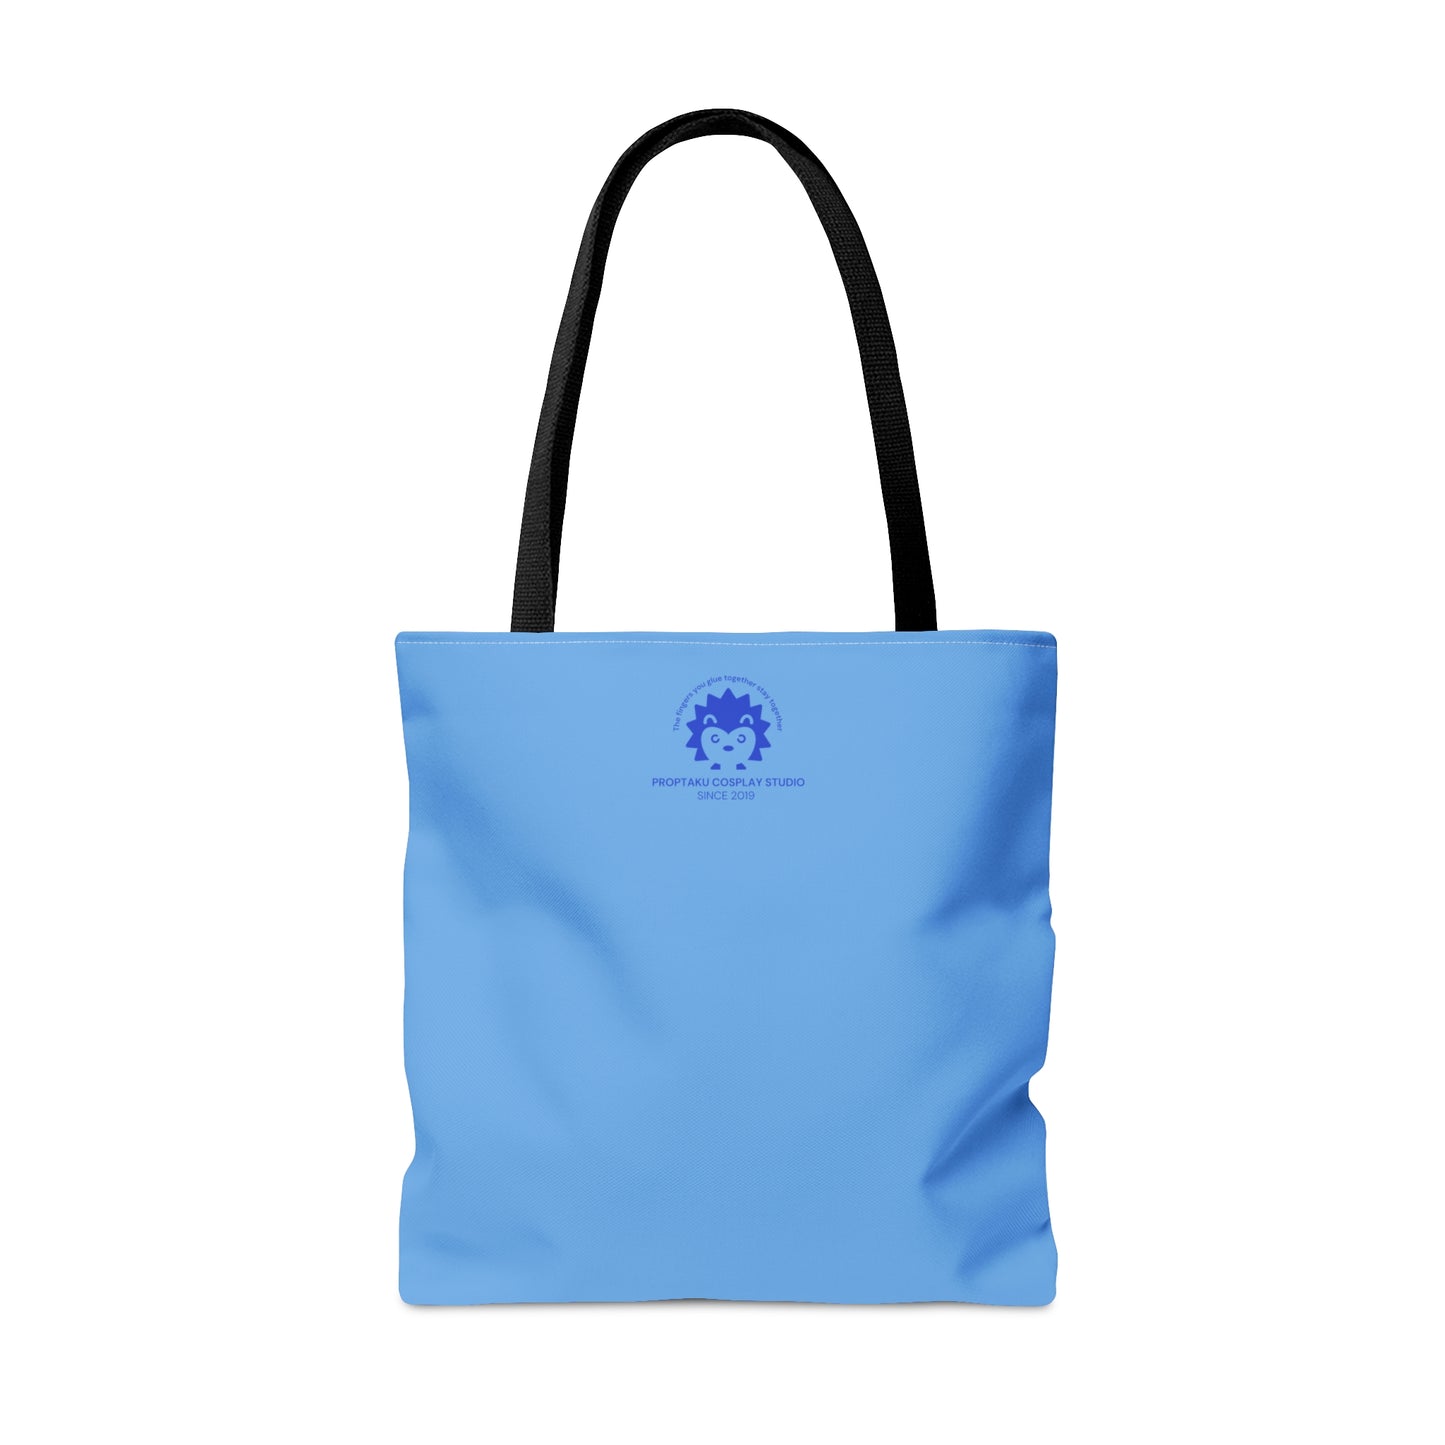 "Better is stout heart..." Tote Bag